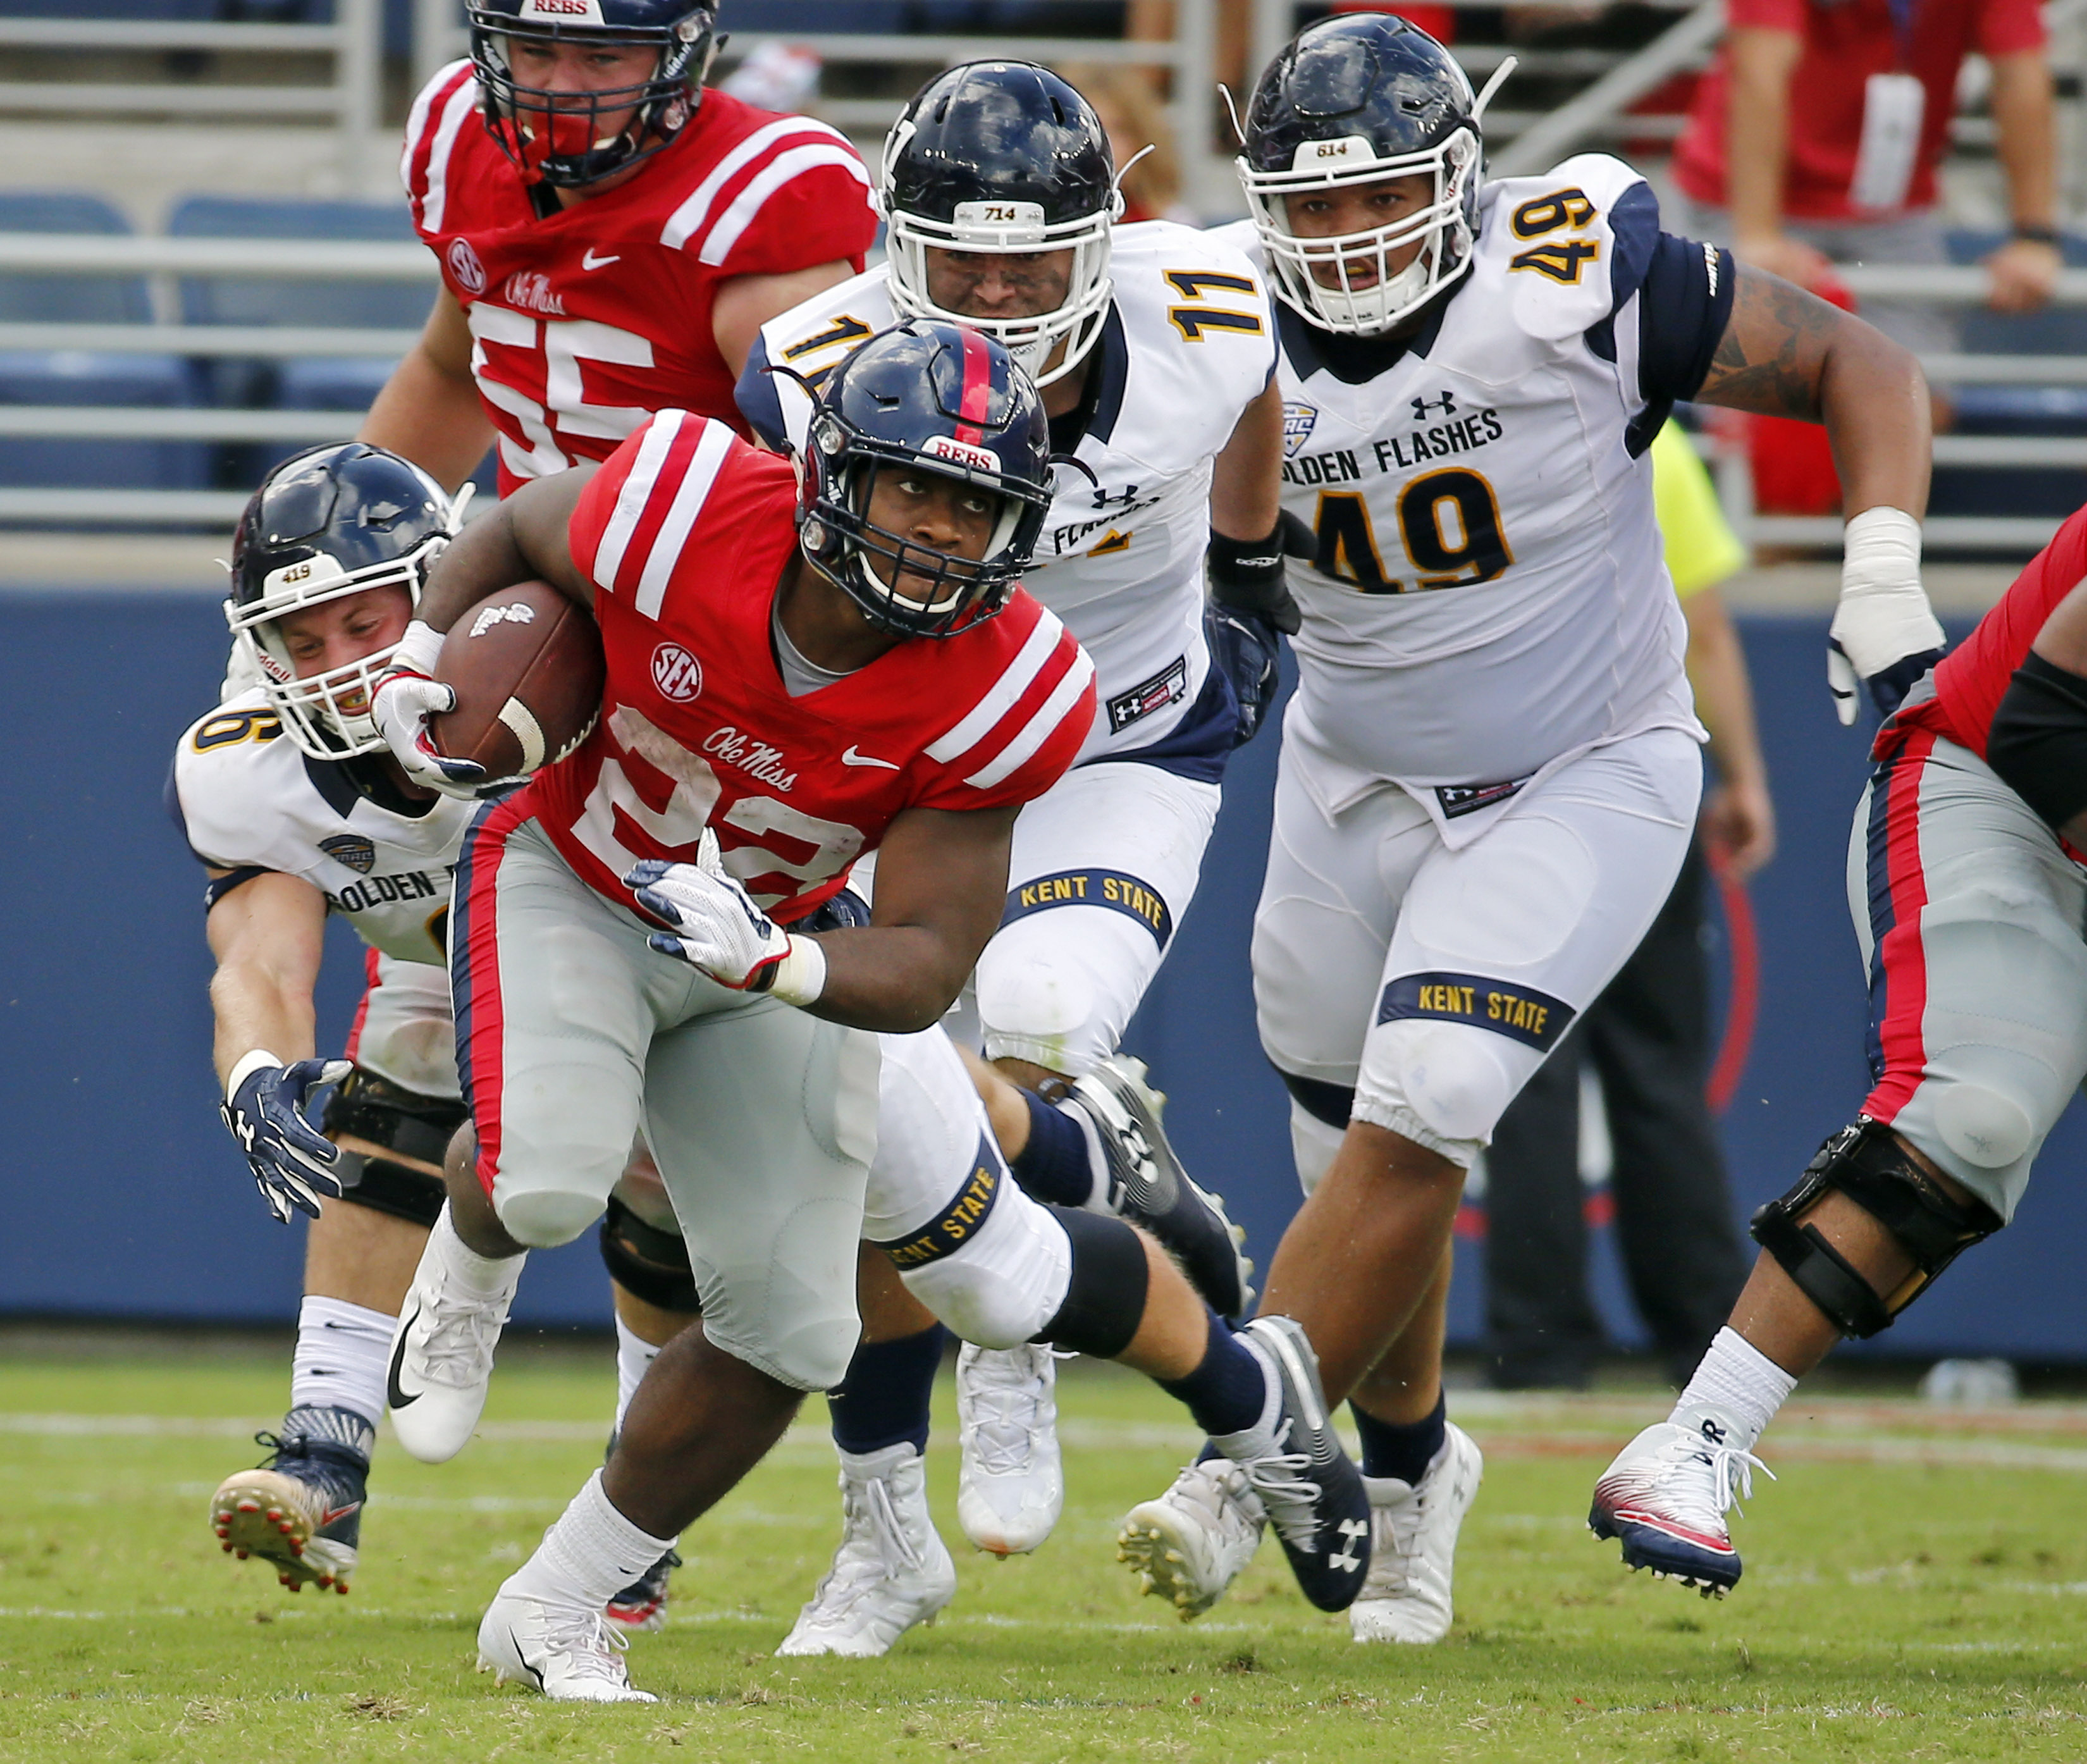 Mississippi rallies in second half, beats Kent St 38-17